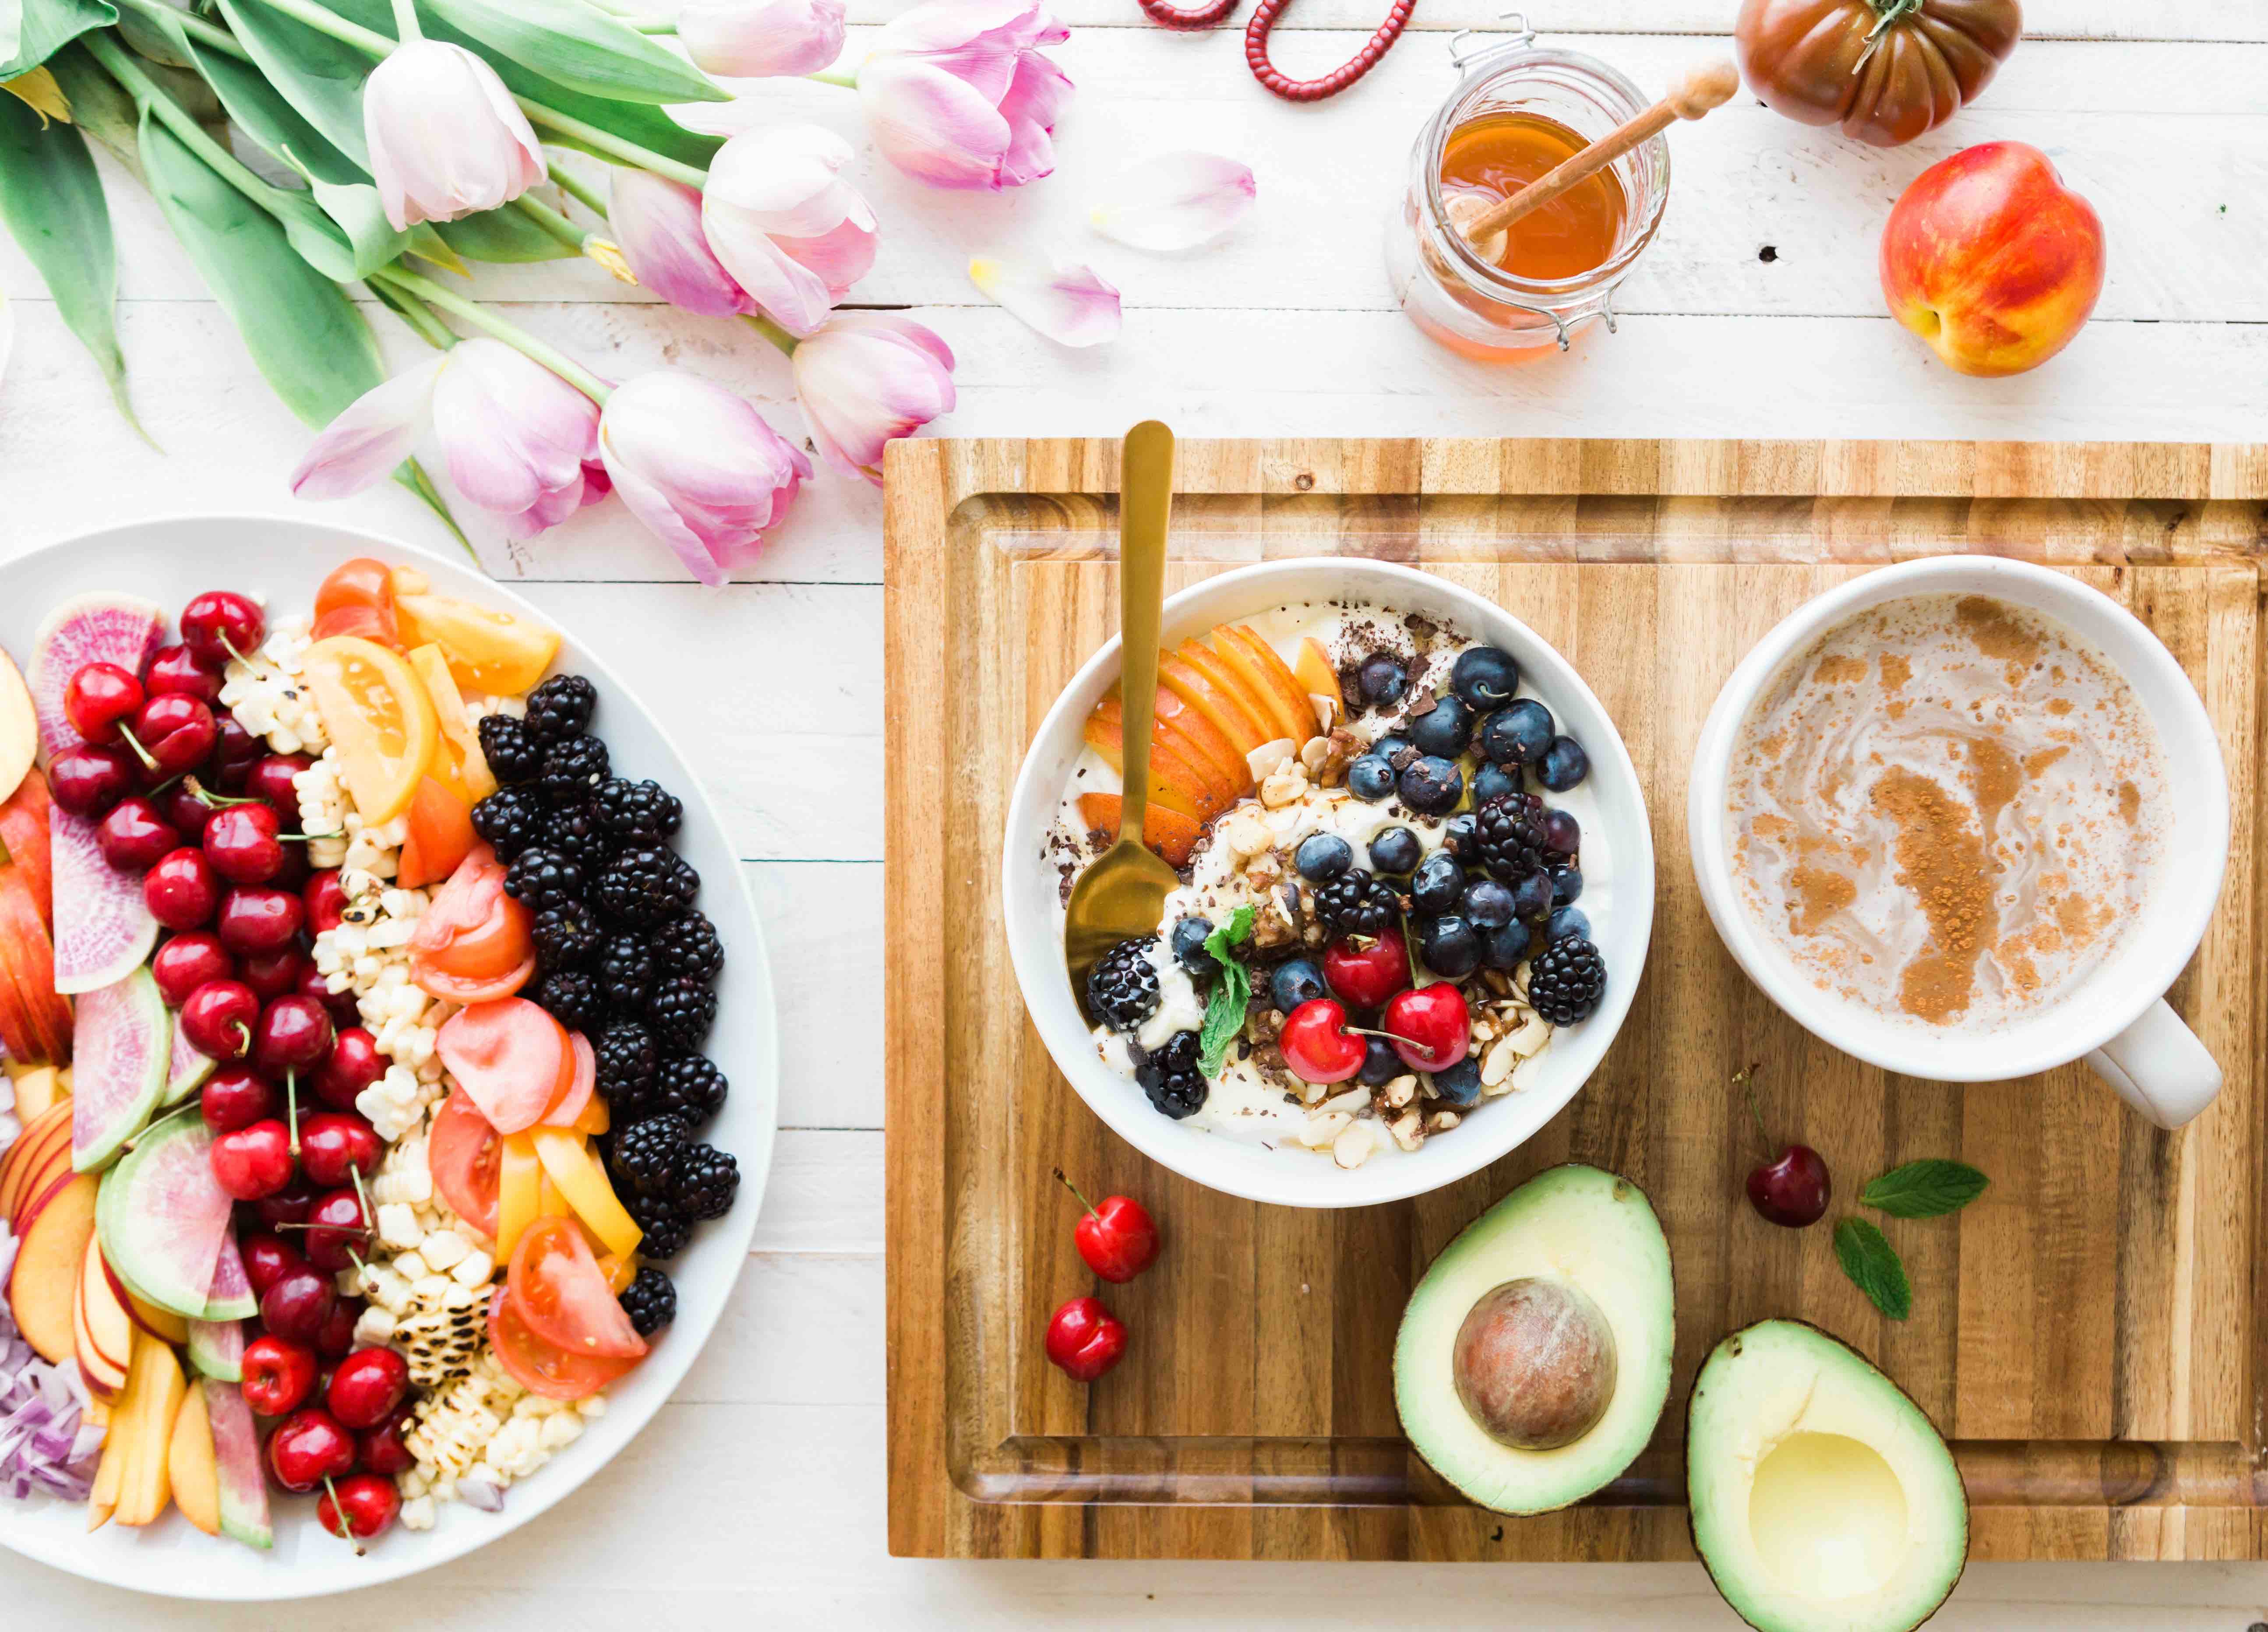 Bowl of sliced fruit, flowers, a latte, granola, and avocado on a board